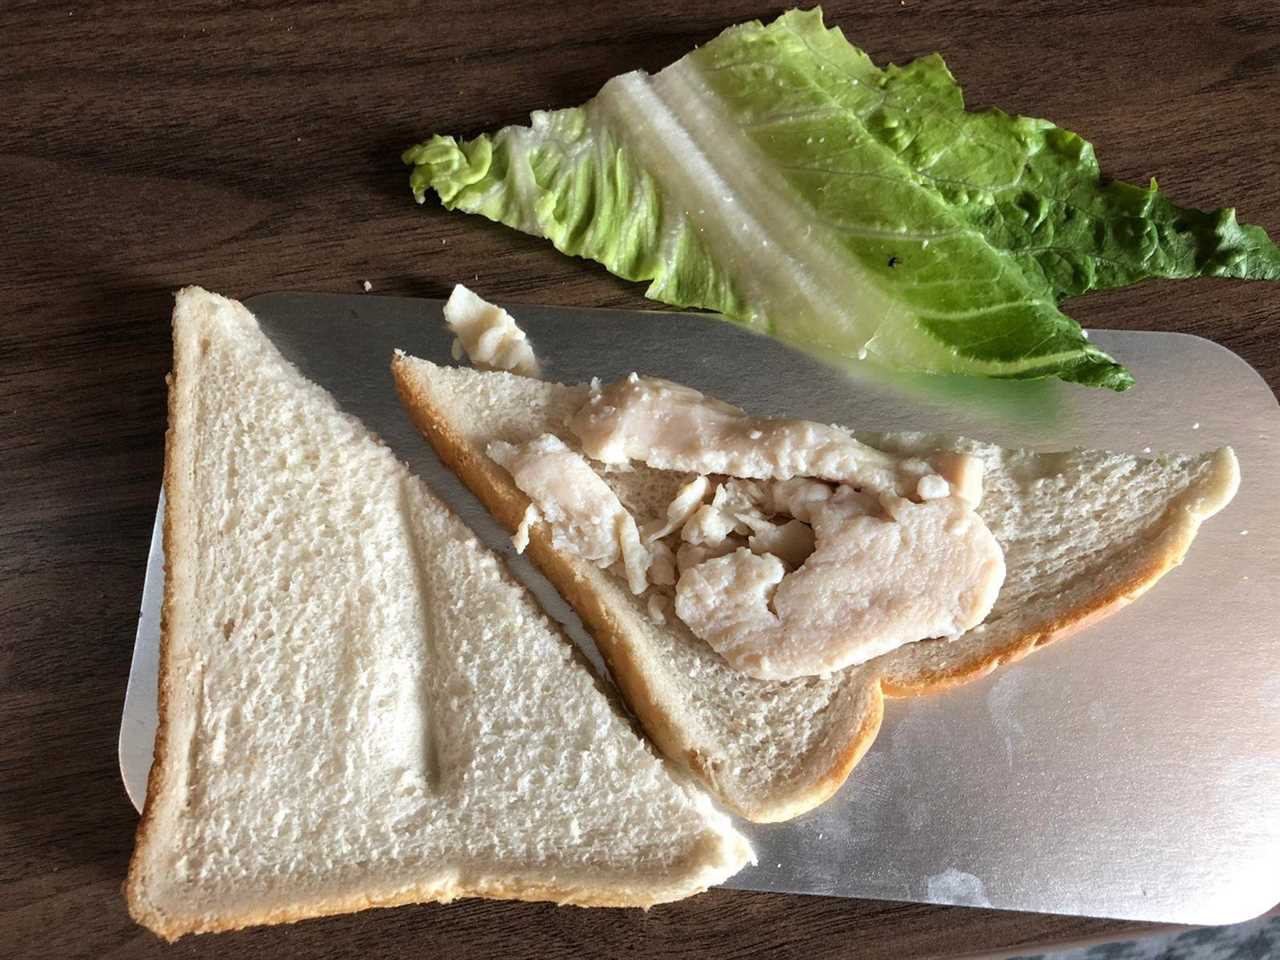 Man in hotel quarantine furious after being served frozen chicken sandwich and kids size meals